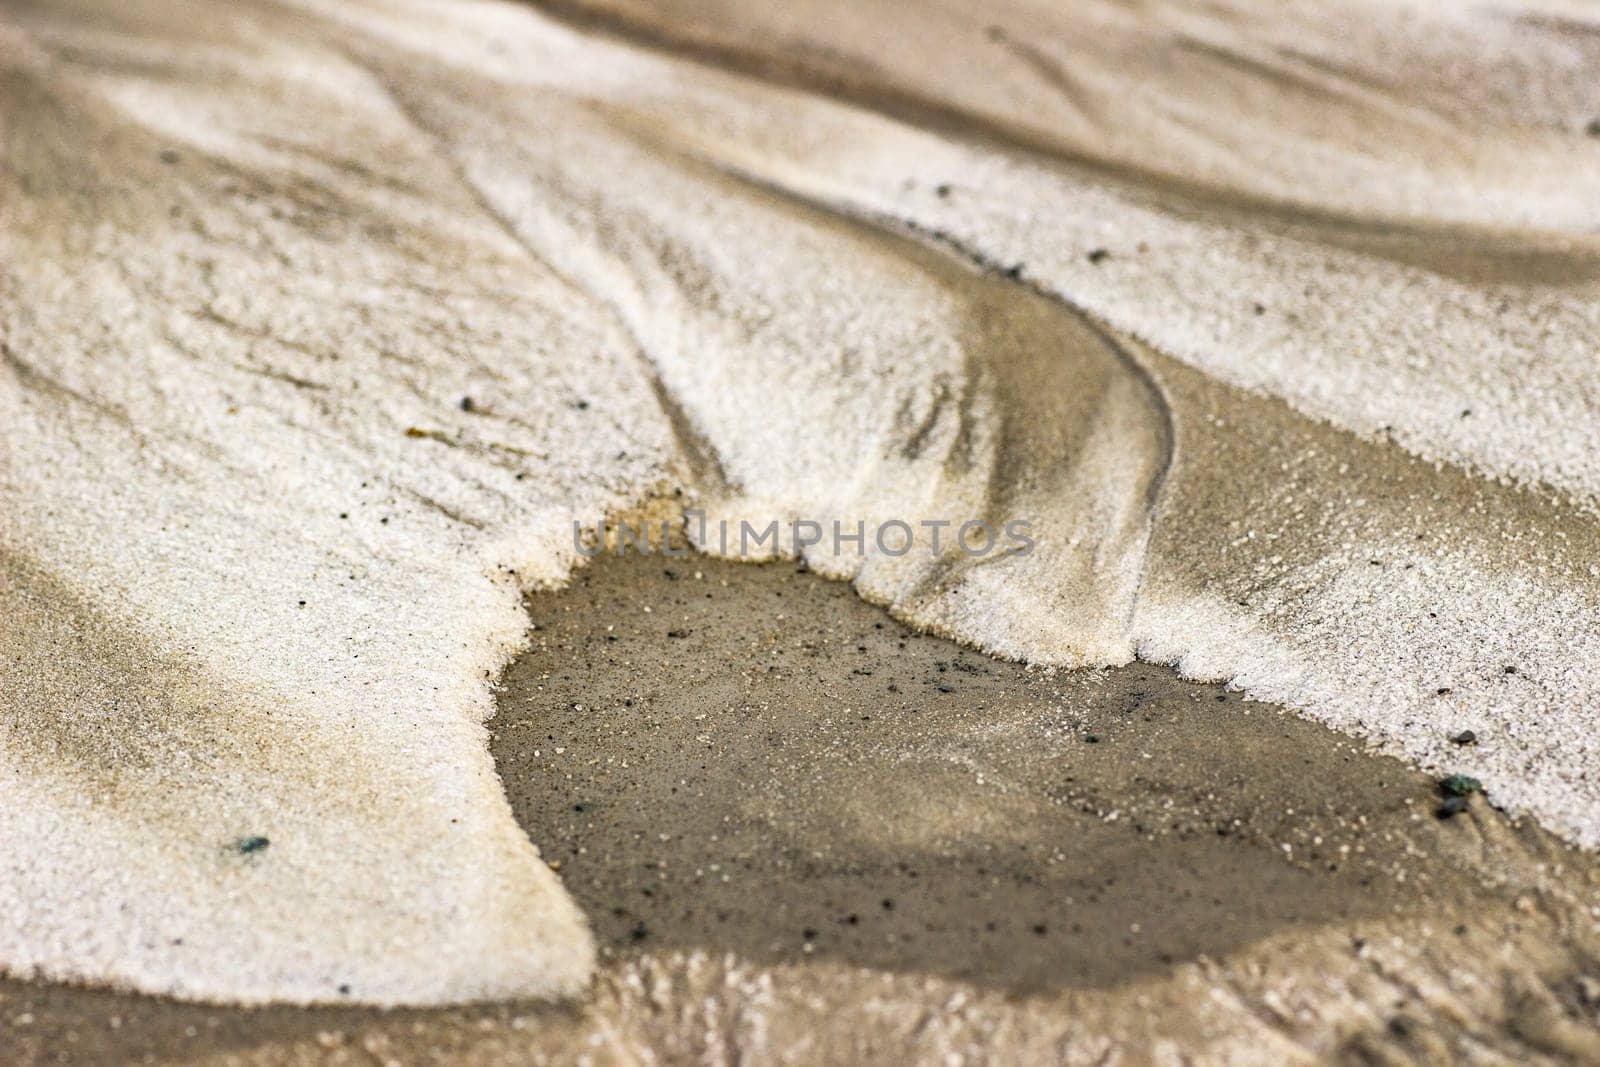 Cracked dry ground sand on the nature outdoors. Texture, background, sample